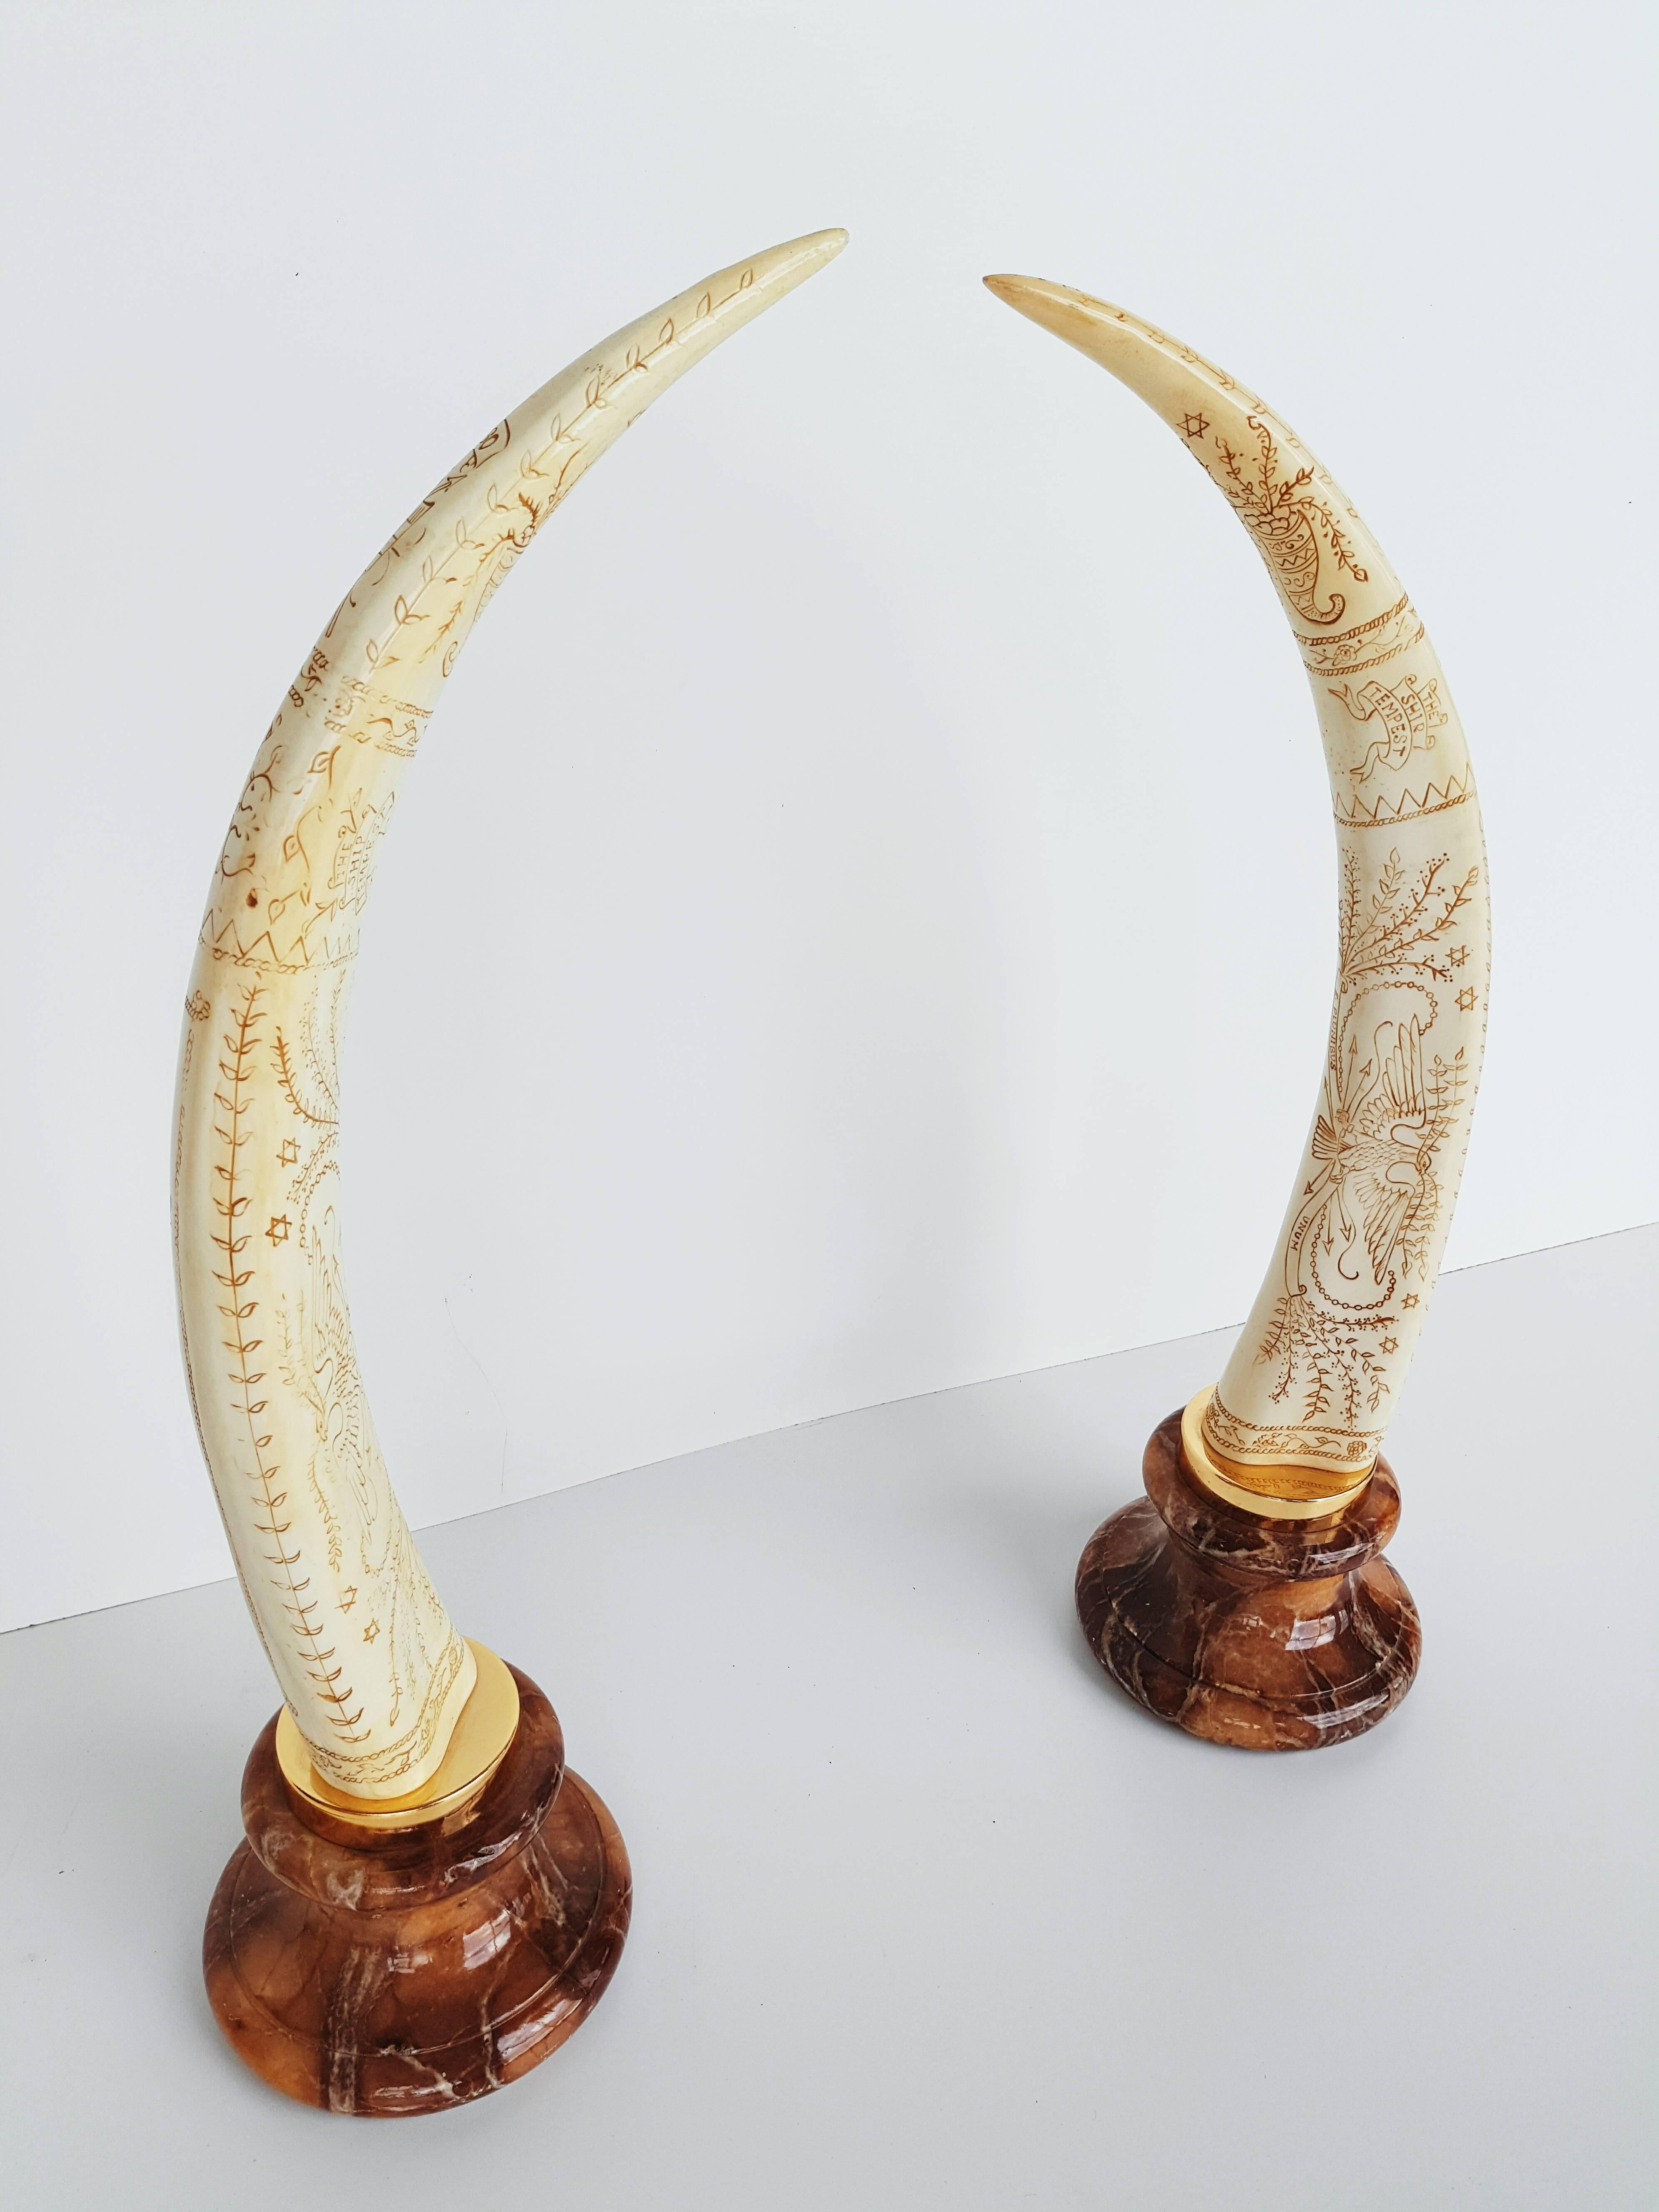 A pair of resin elephant tusk form arches with brass fittings and a marble plinth base, circa 1970s. Please note; these pieces are not real ivory. They are decorative resin replicas.